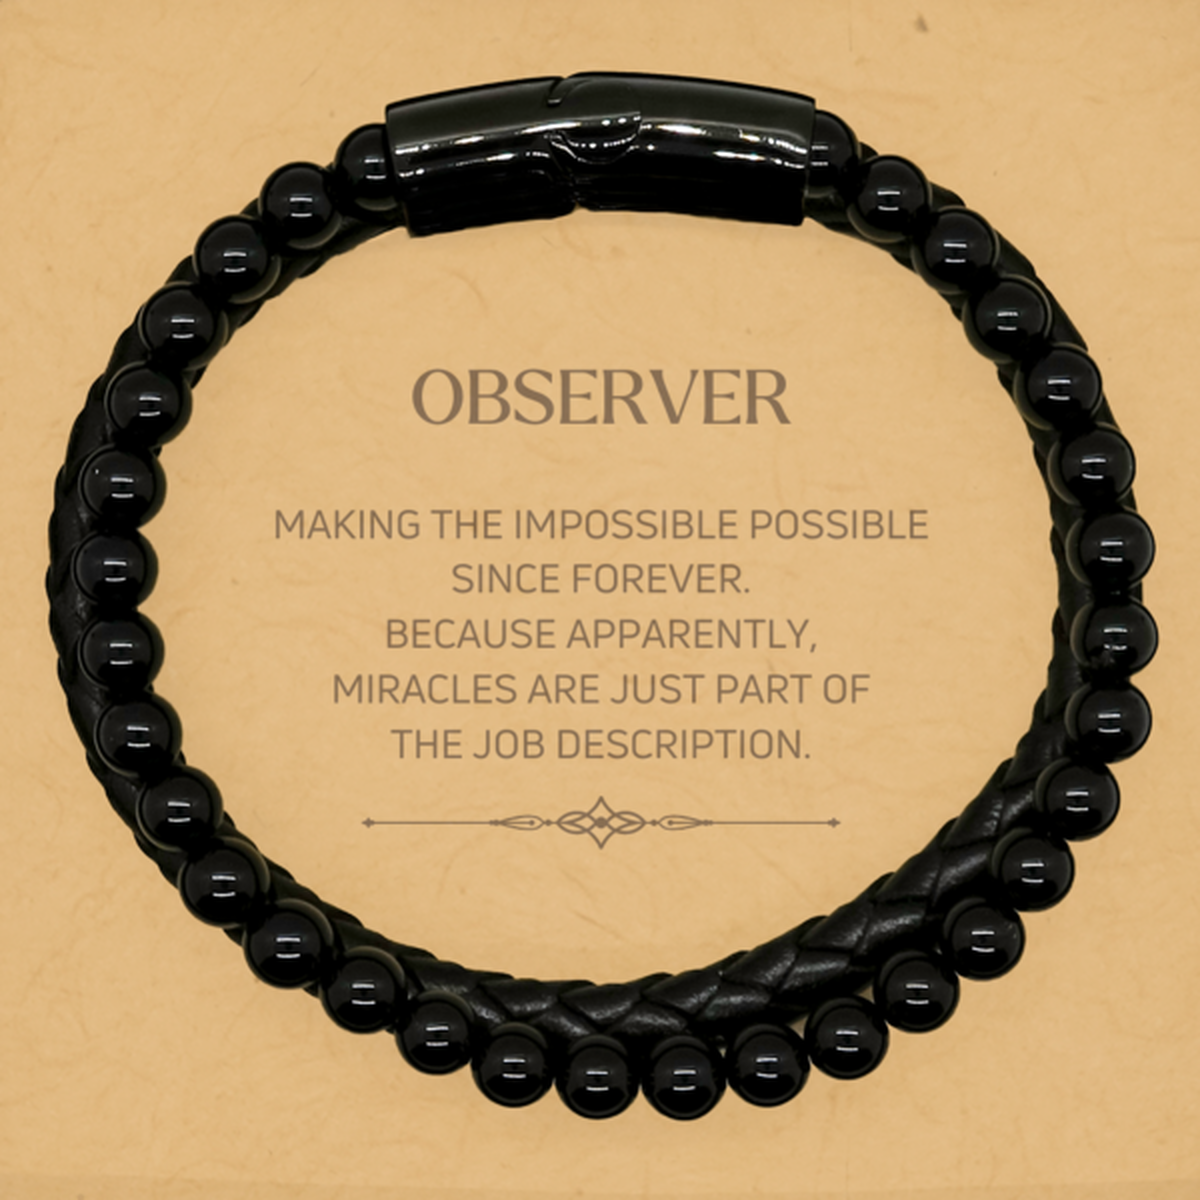 Funny Observer Gifts, Miracles are just part of the job description, Inspirational Birthday Stone Leather Bracelets For Observer, Men, Women, Coworkers, Friends, Boss